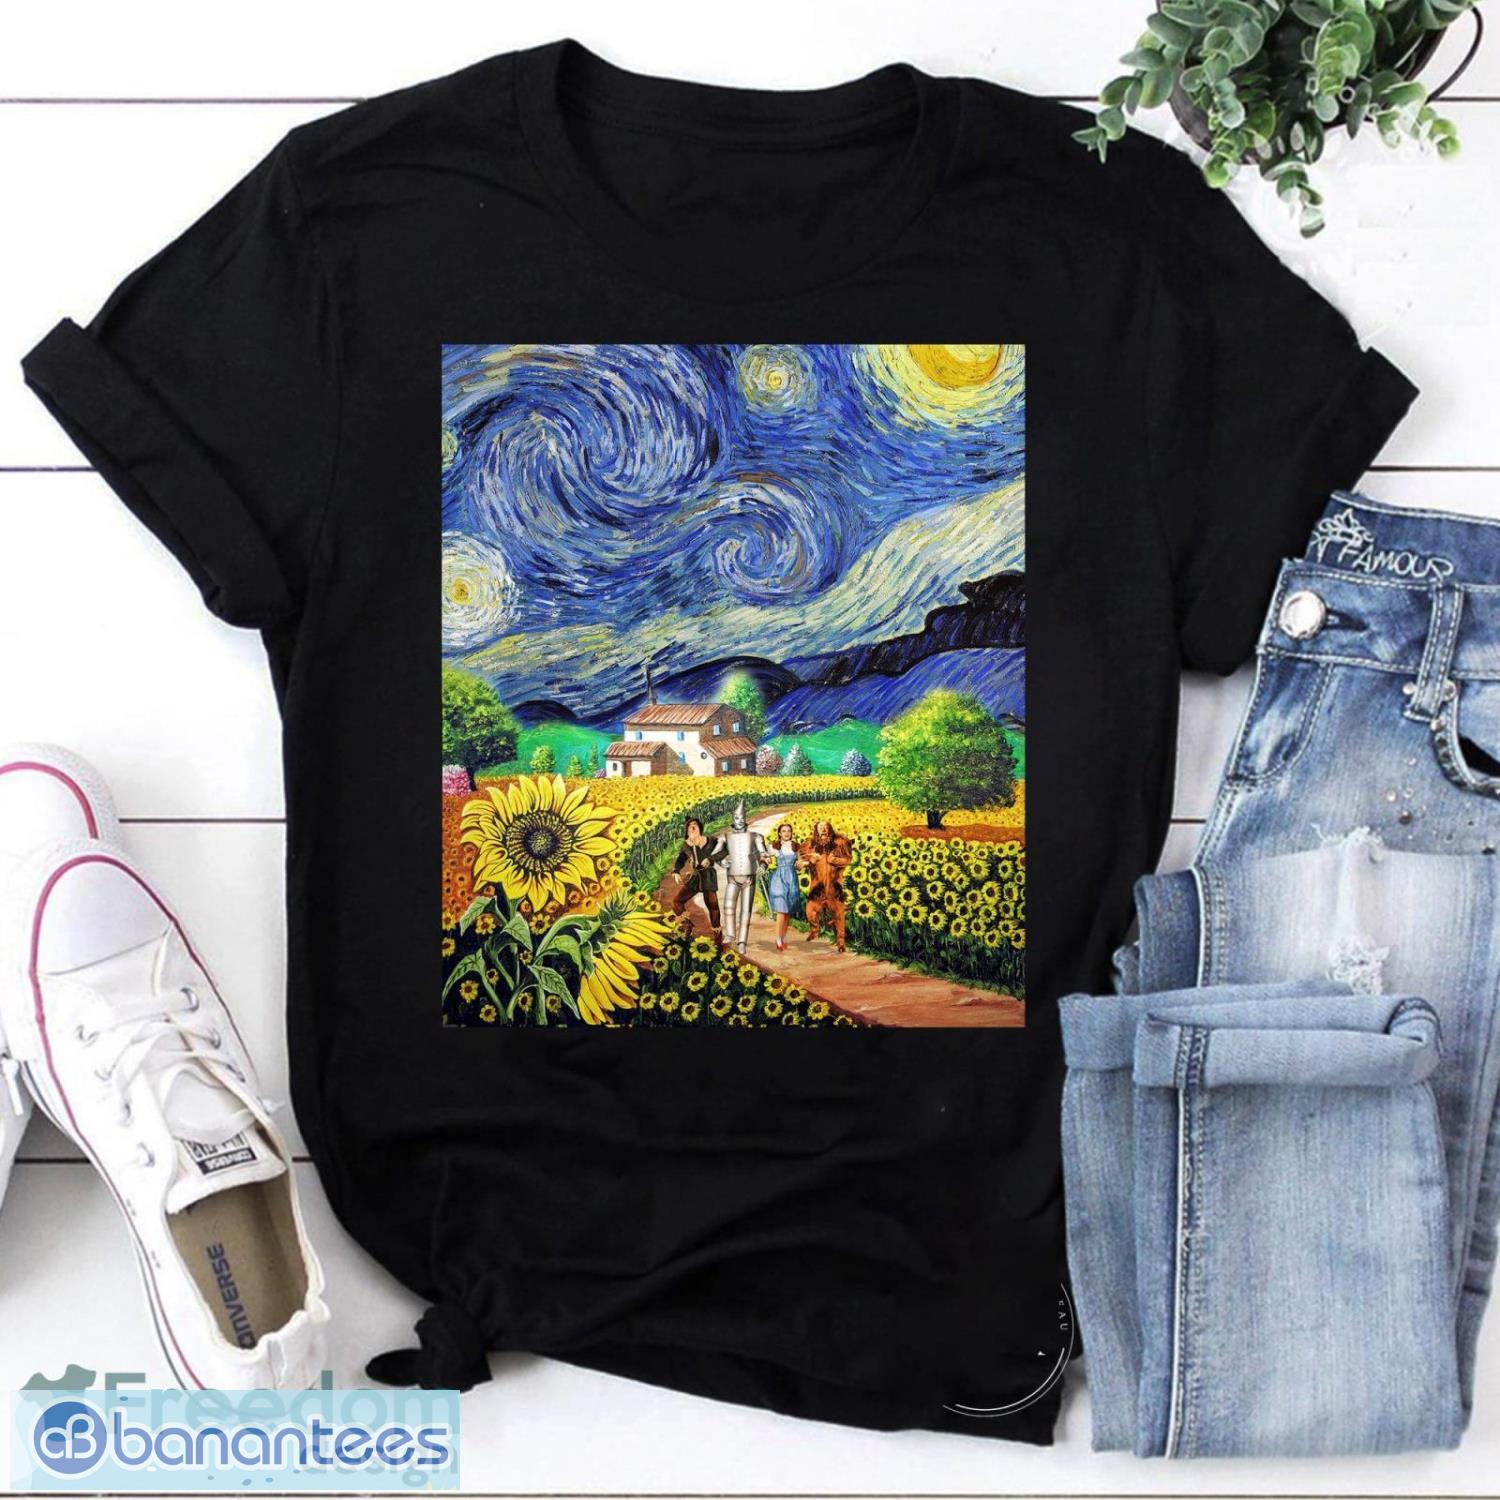 The Wizard of Oz Sunflower Garden The Starry Night Vintage T-Shirt, The Wizard of Oz Shirt, The Wizard of Oz Movies Shirt Product Photo 1